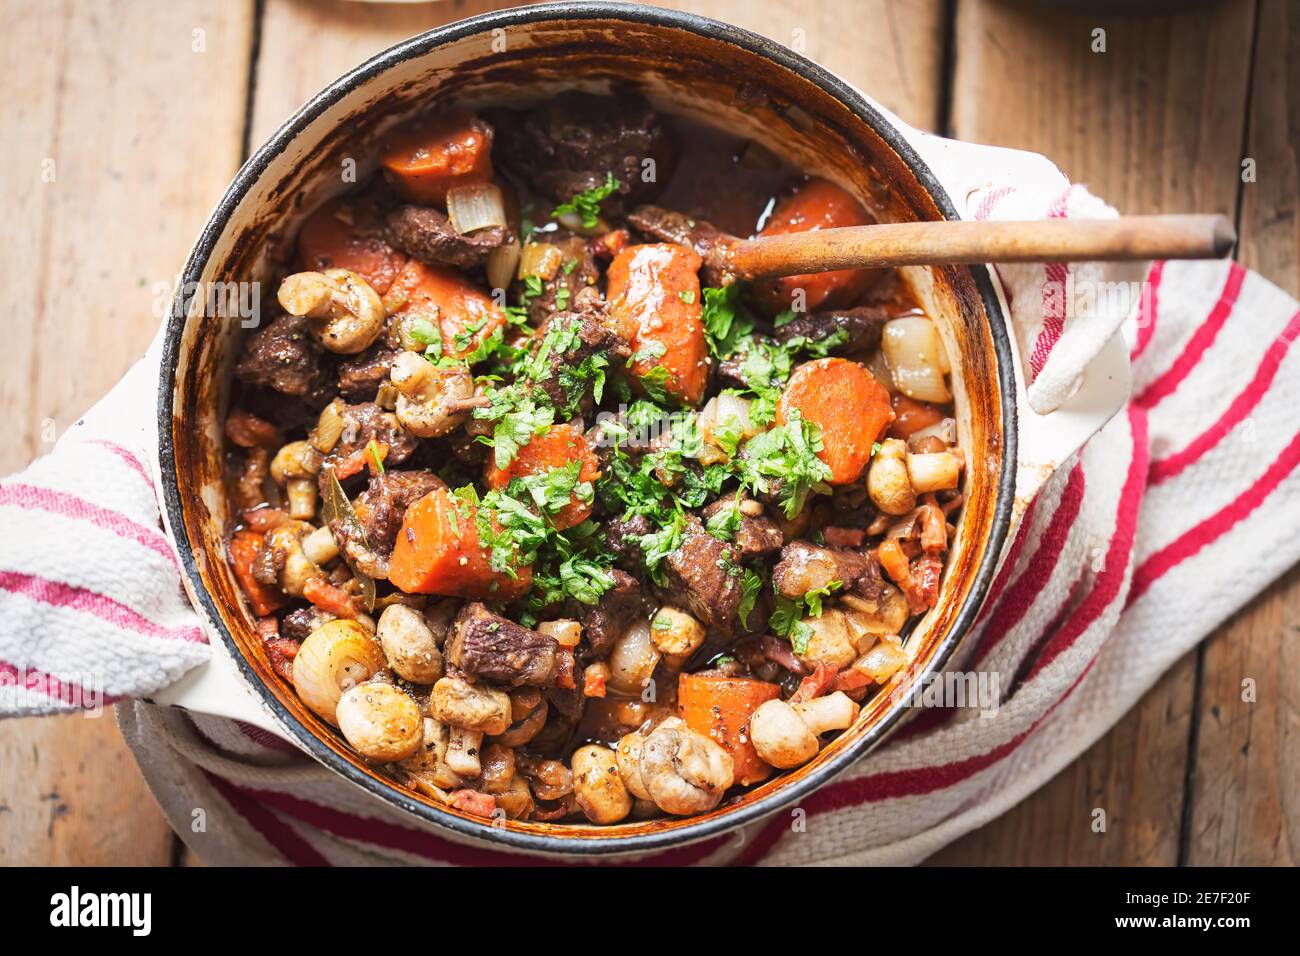 Boeuf bourguignon with carrots, mushrooms, topped with parsley Stock Photo